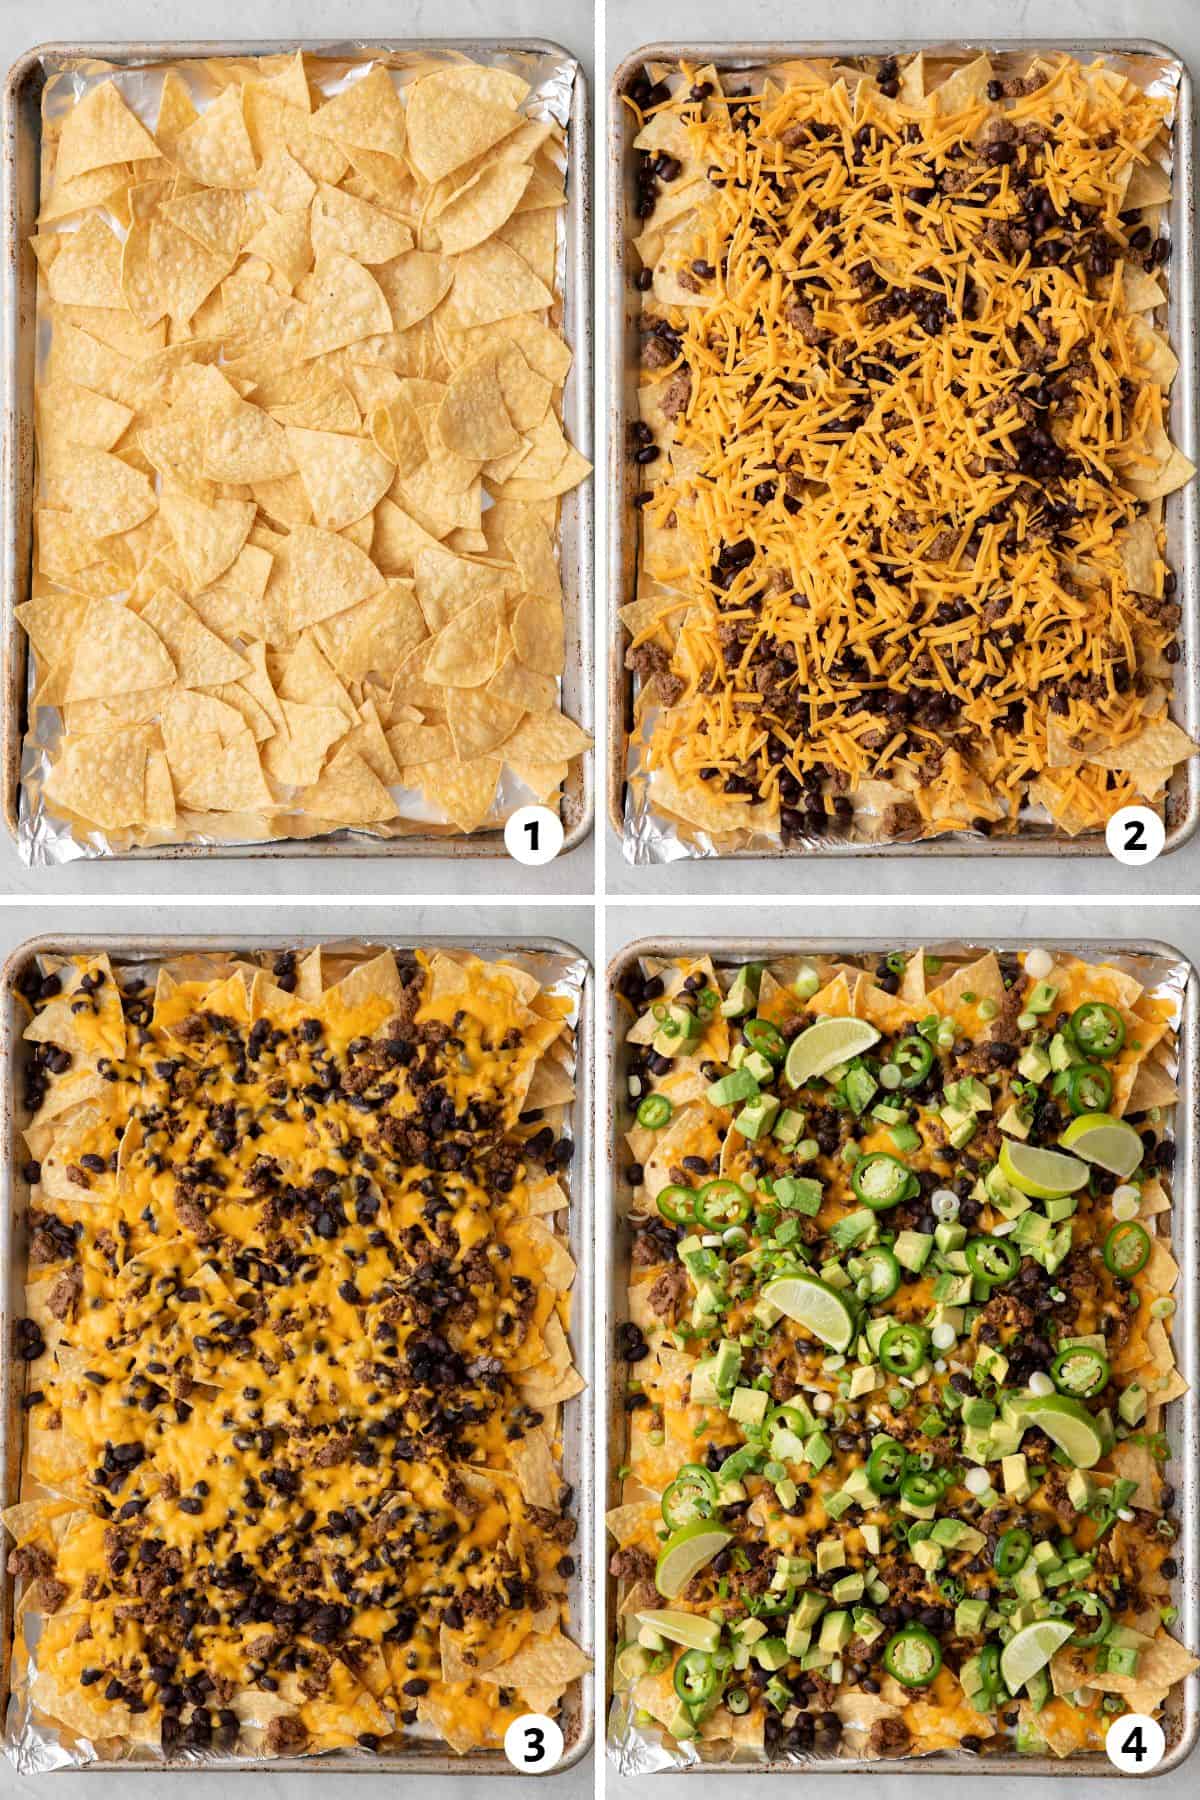 4 image collage making recipe on sheet pan: 1- spread out chips evenly, 2- beef, beans, and cheese added on top, 3- nachos after baking, 4- topped with scallions, jalapenos, avocado, and lime wedges.